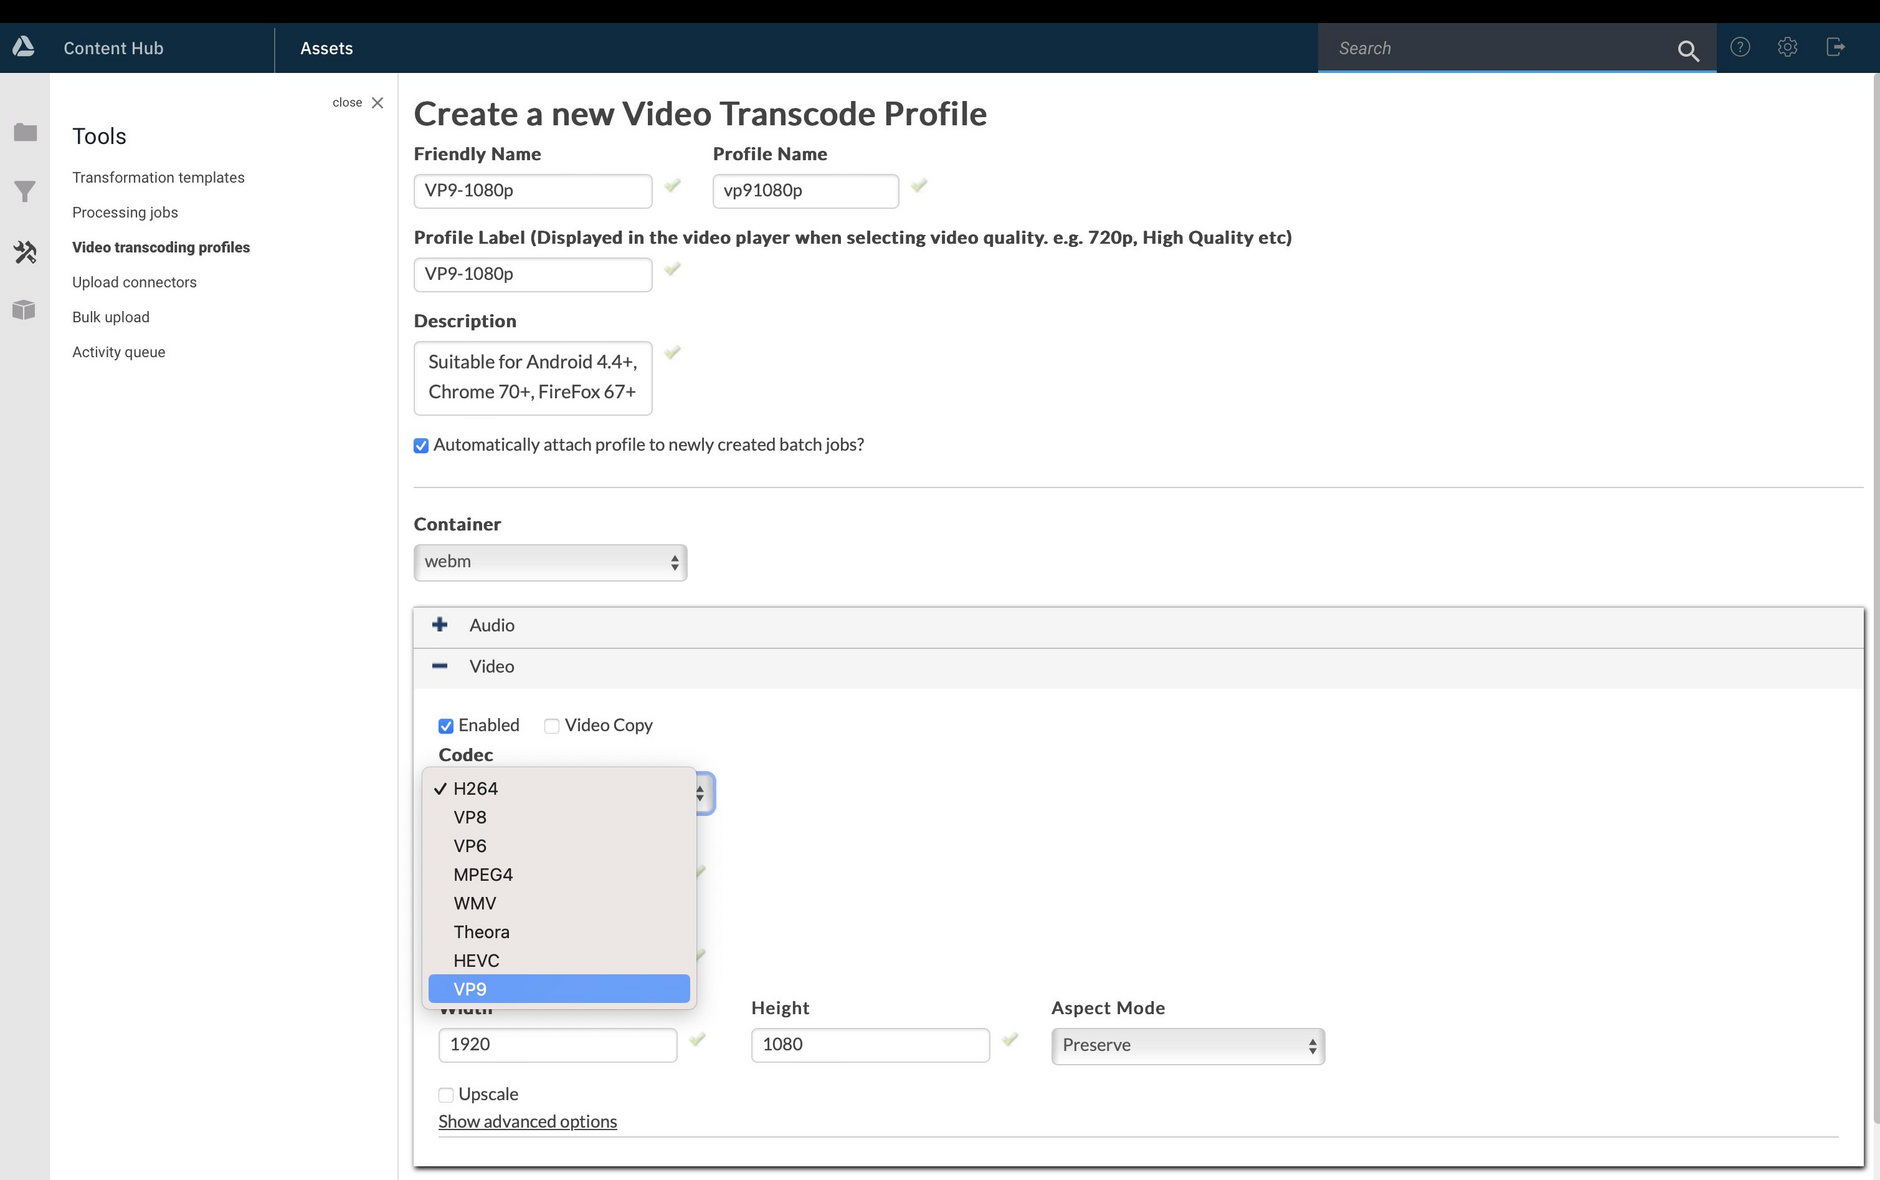 You can encode video using the VP9 and HEVC codecs by defining video transcoding profiles